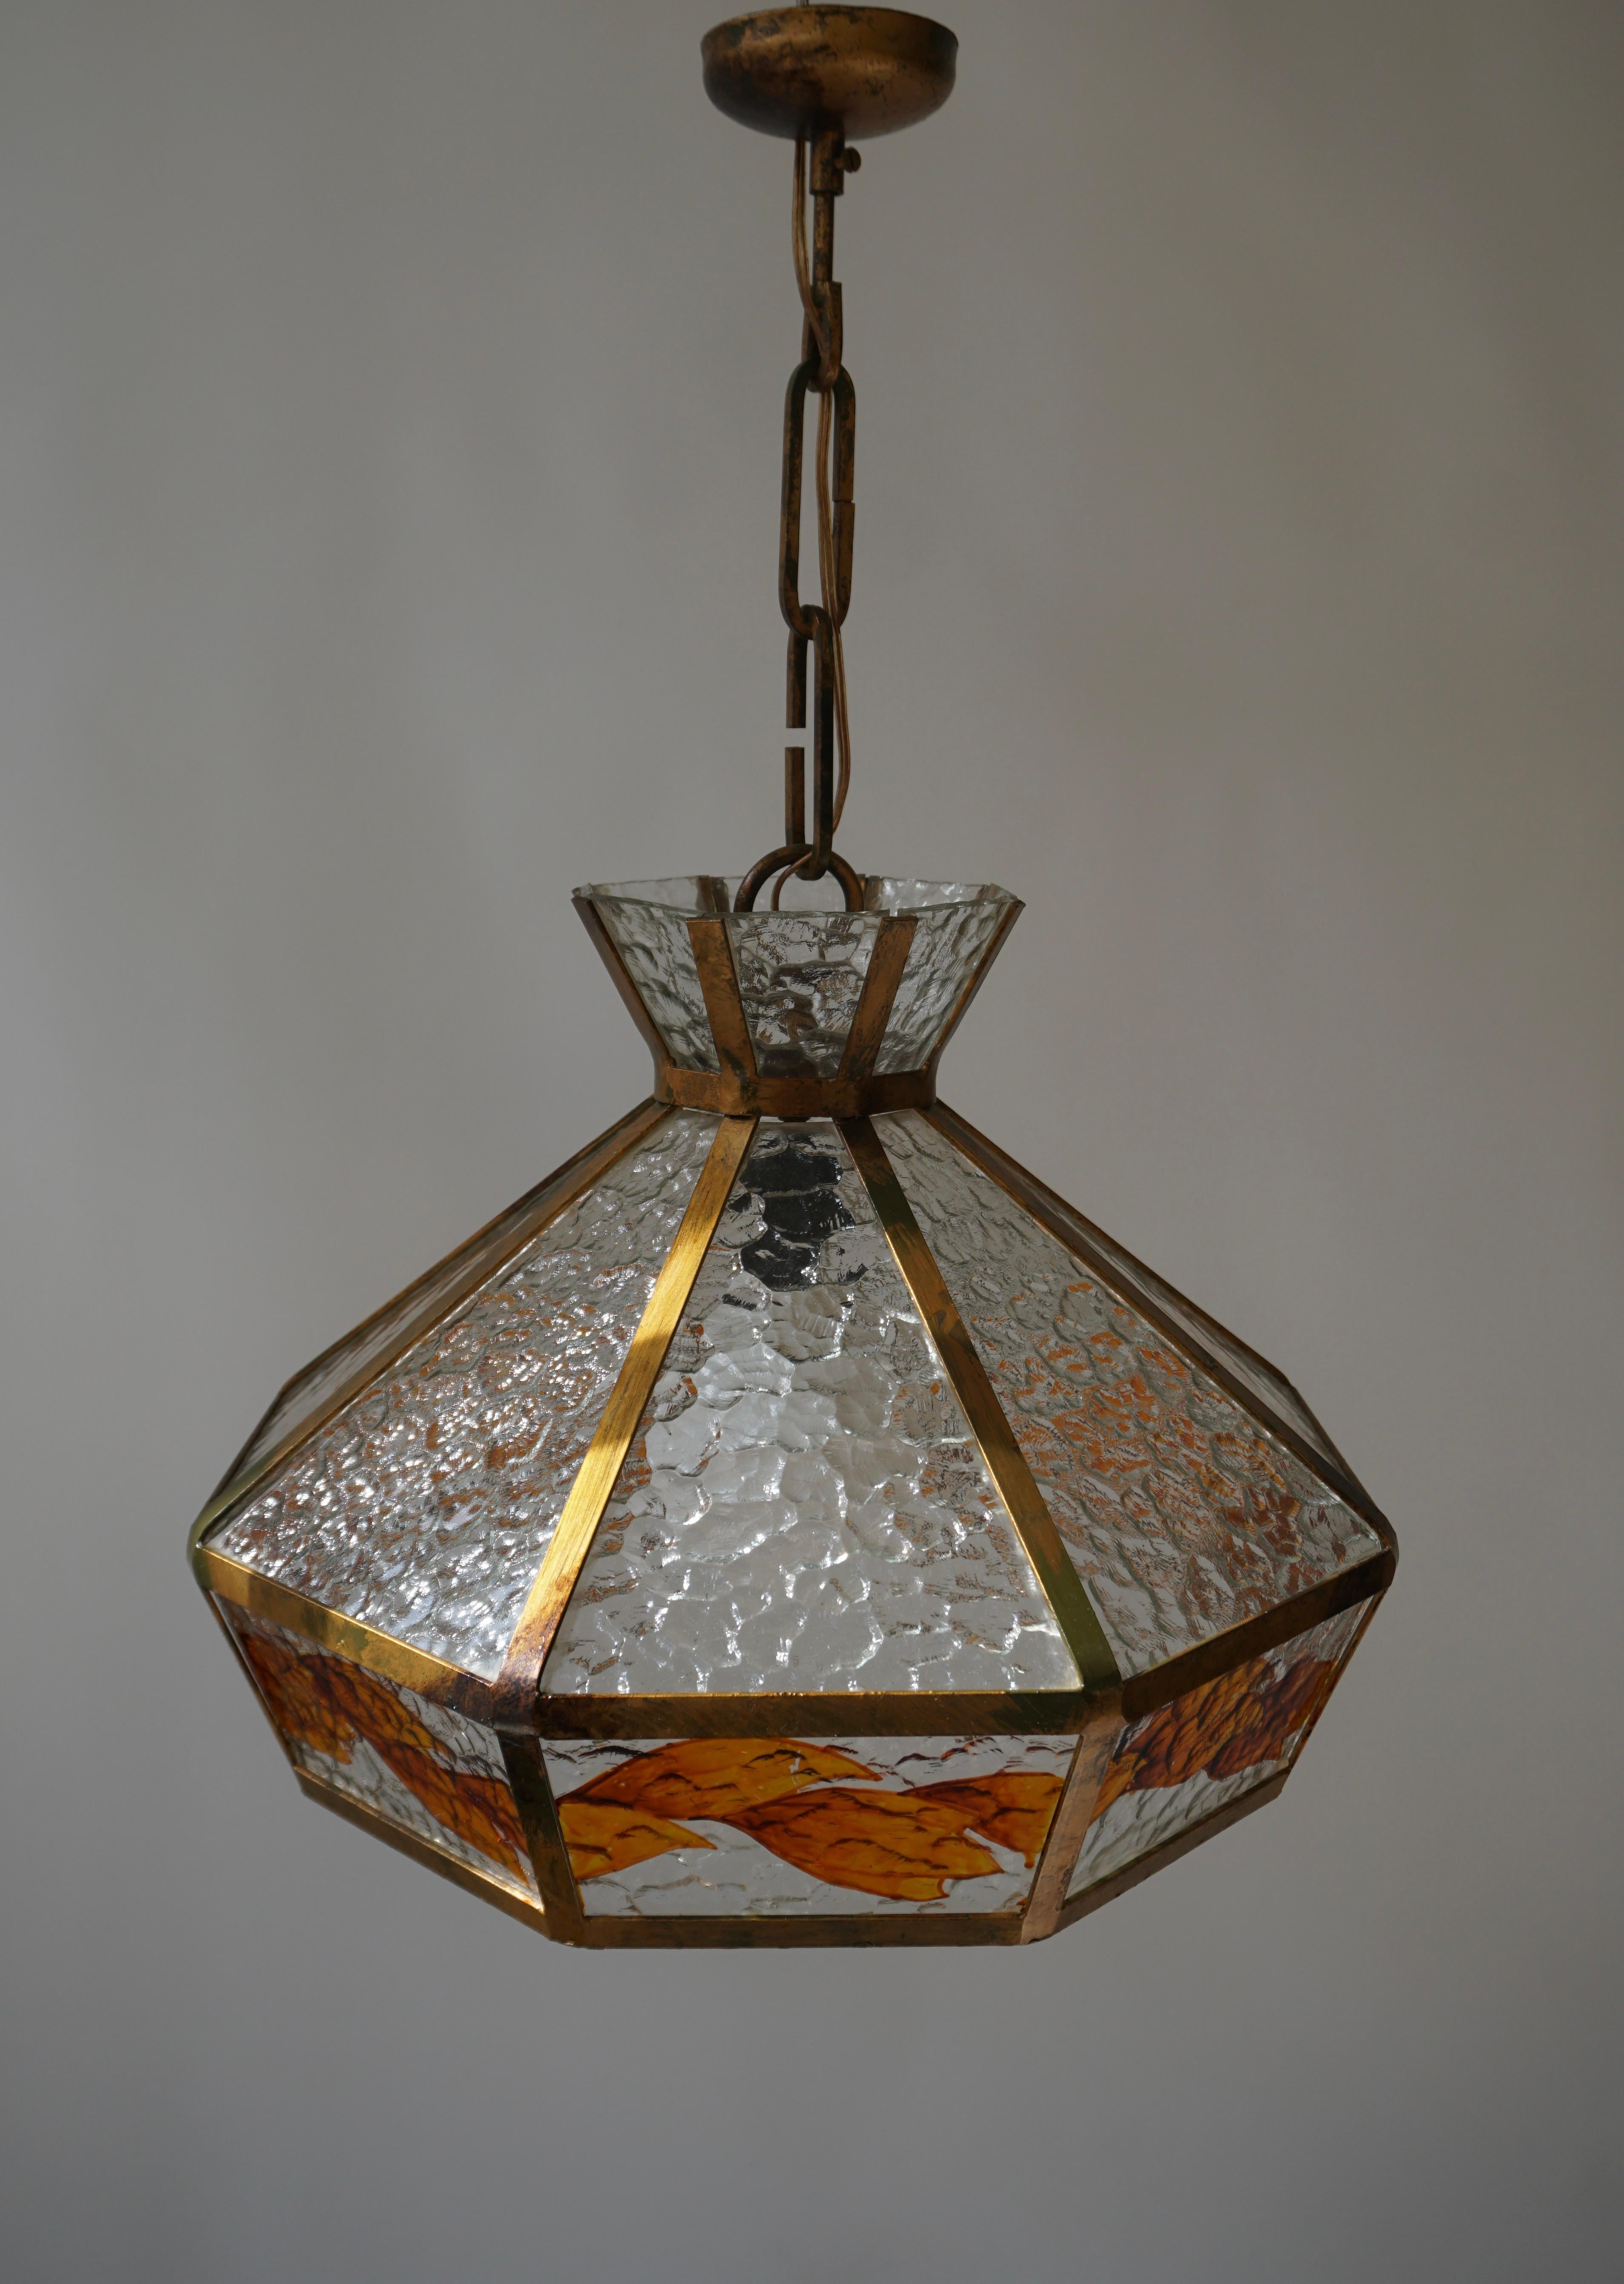 Brutalist hand painted stained glass chandelier and signed by the artist.

Dimensions are;
Diameter 50 cm.
Height fixture 35 cm.
Total height 70 cm.
Weight 3 kg.